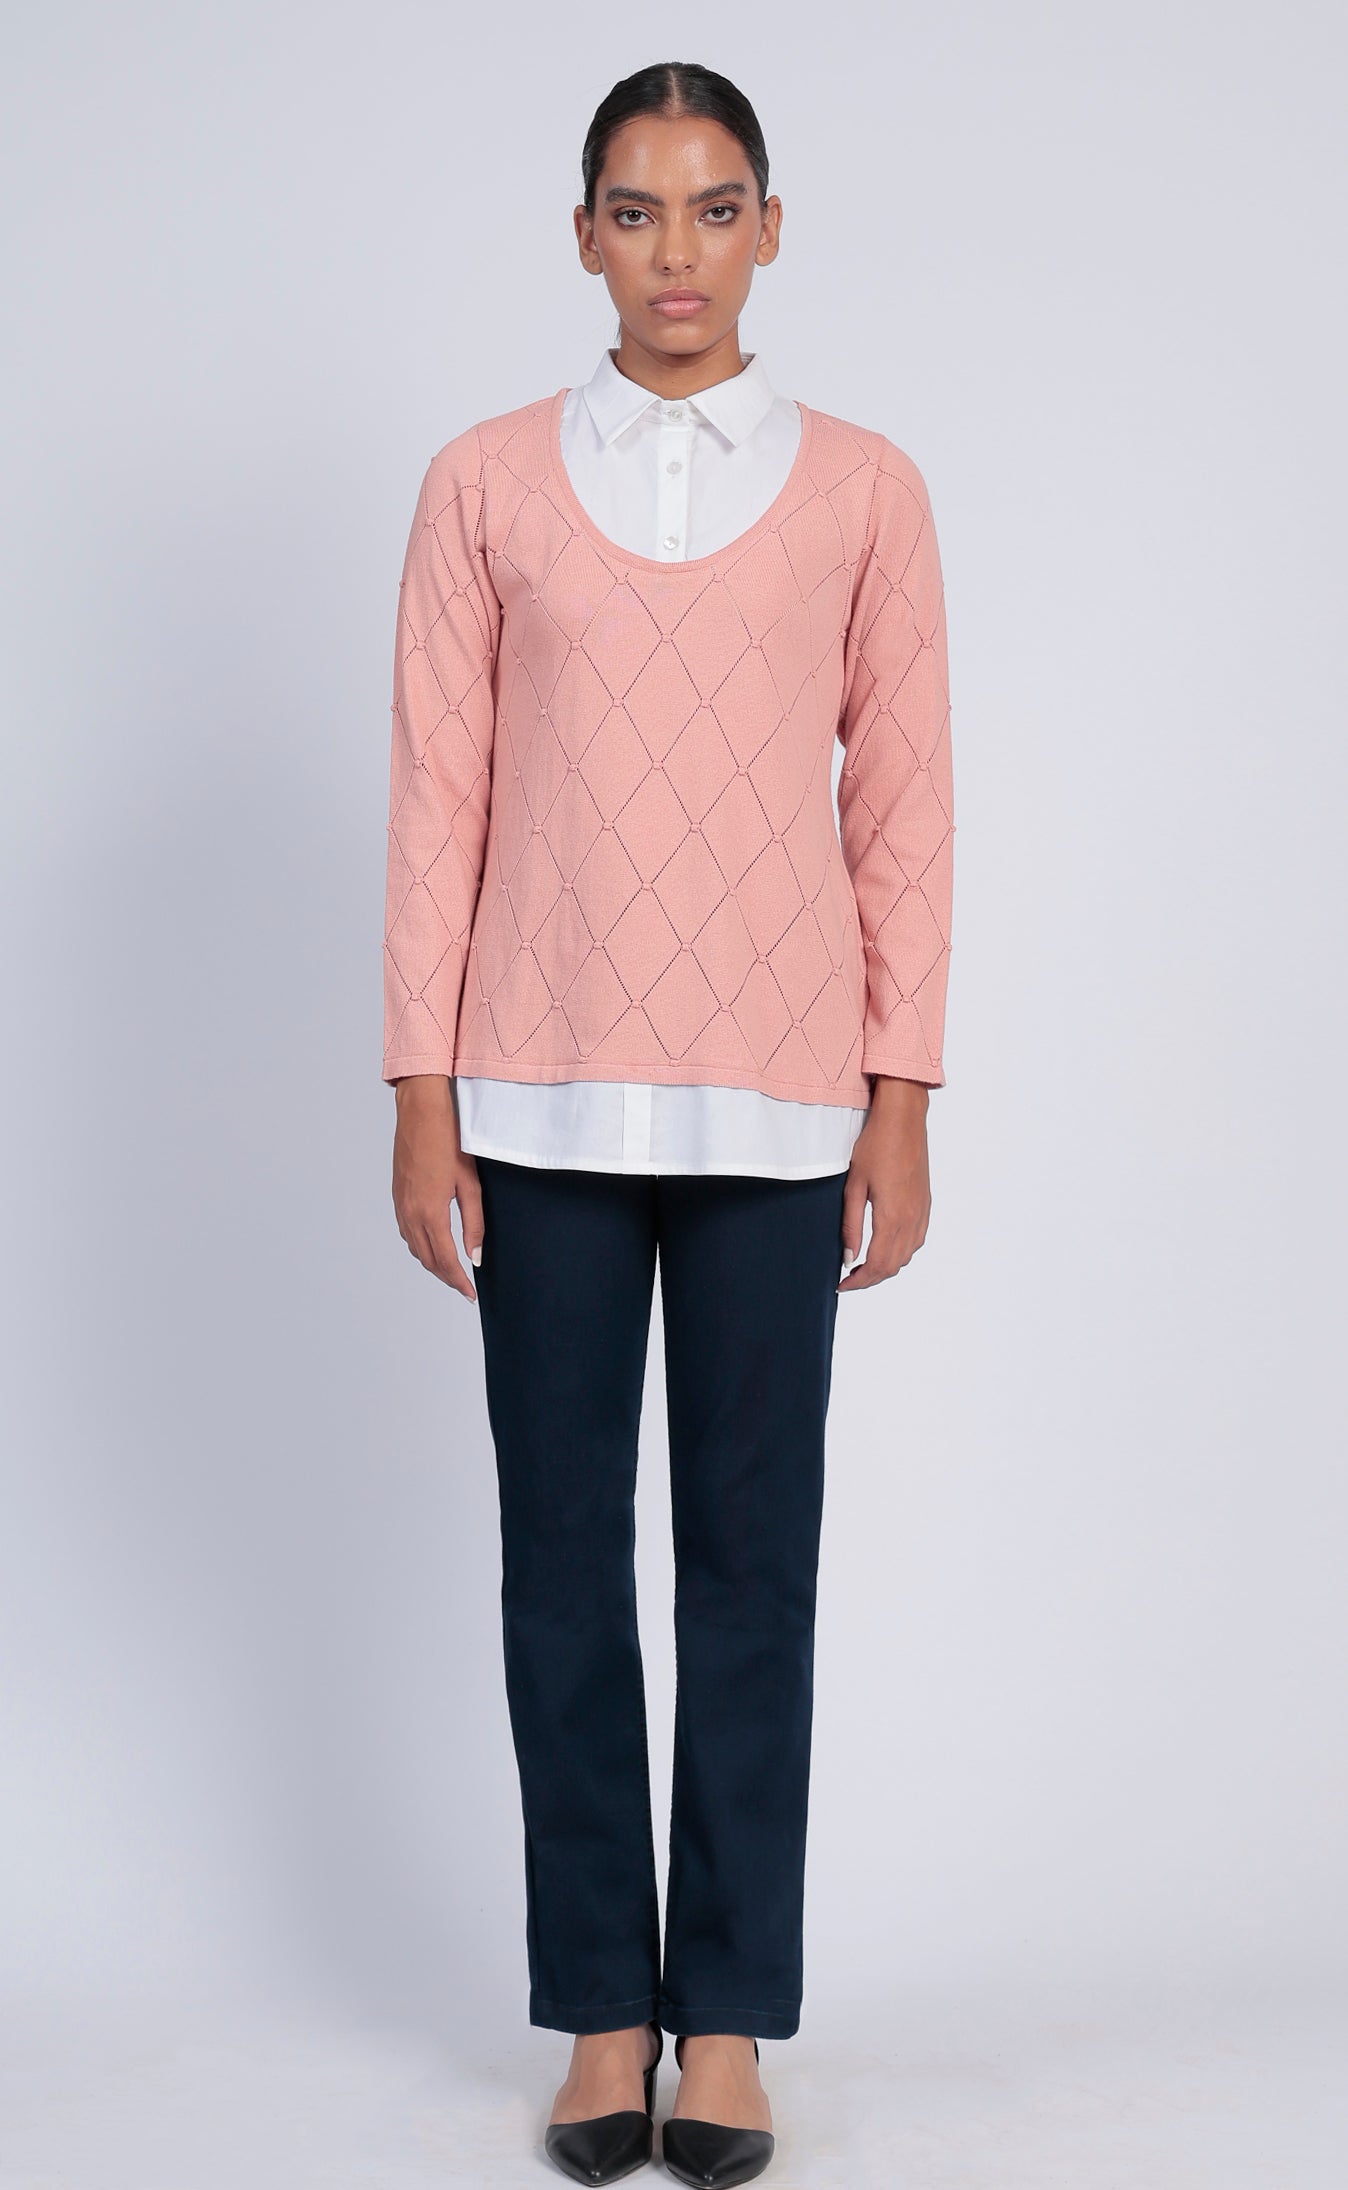 2 in 1 - knit blouse with chiffon shirt